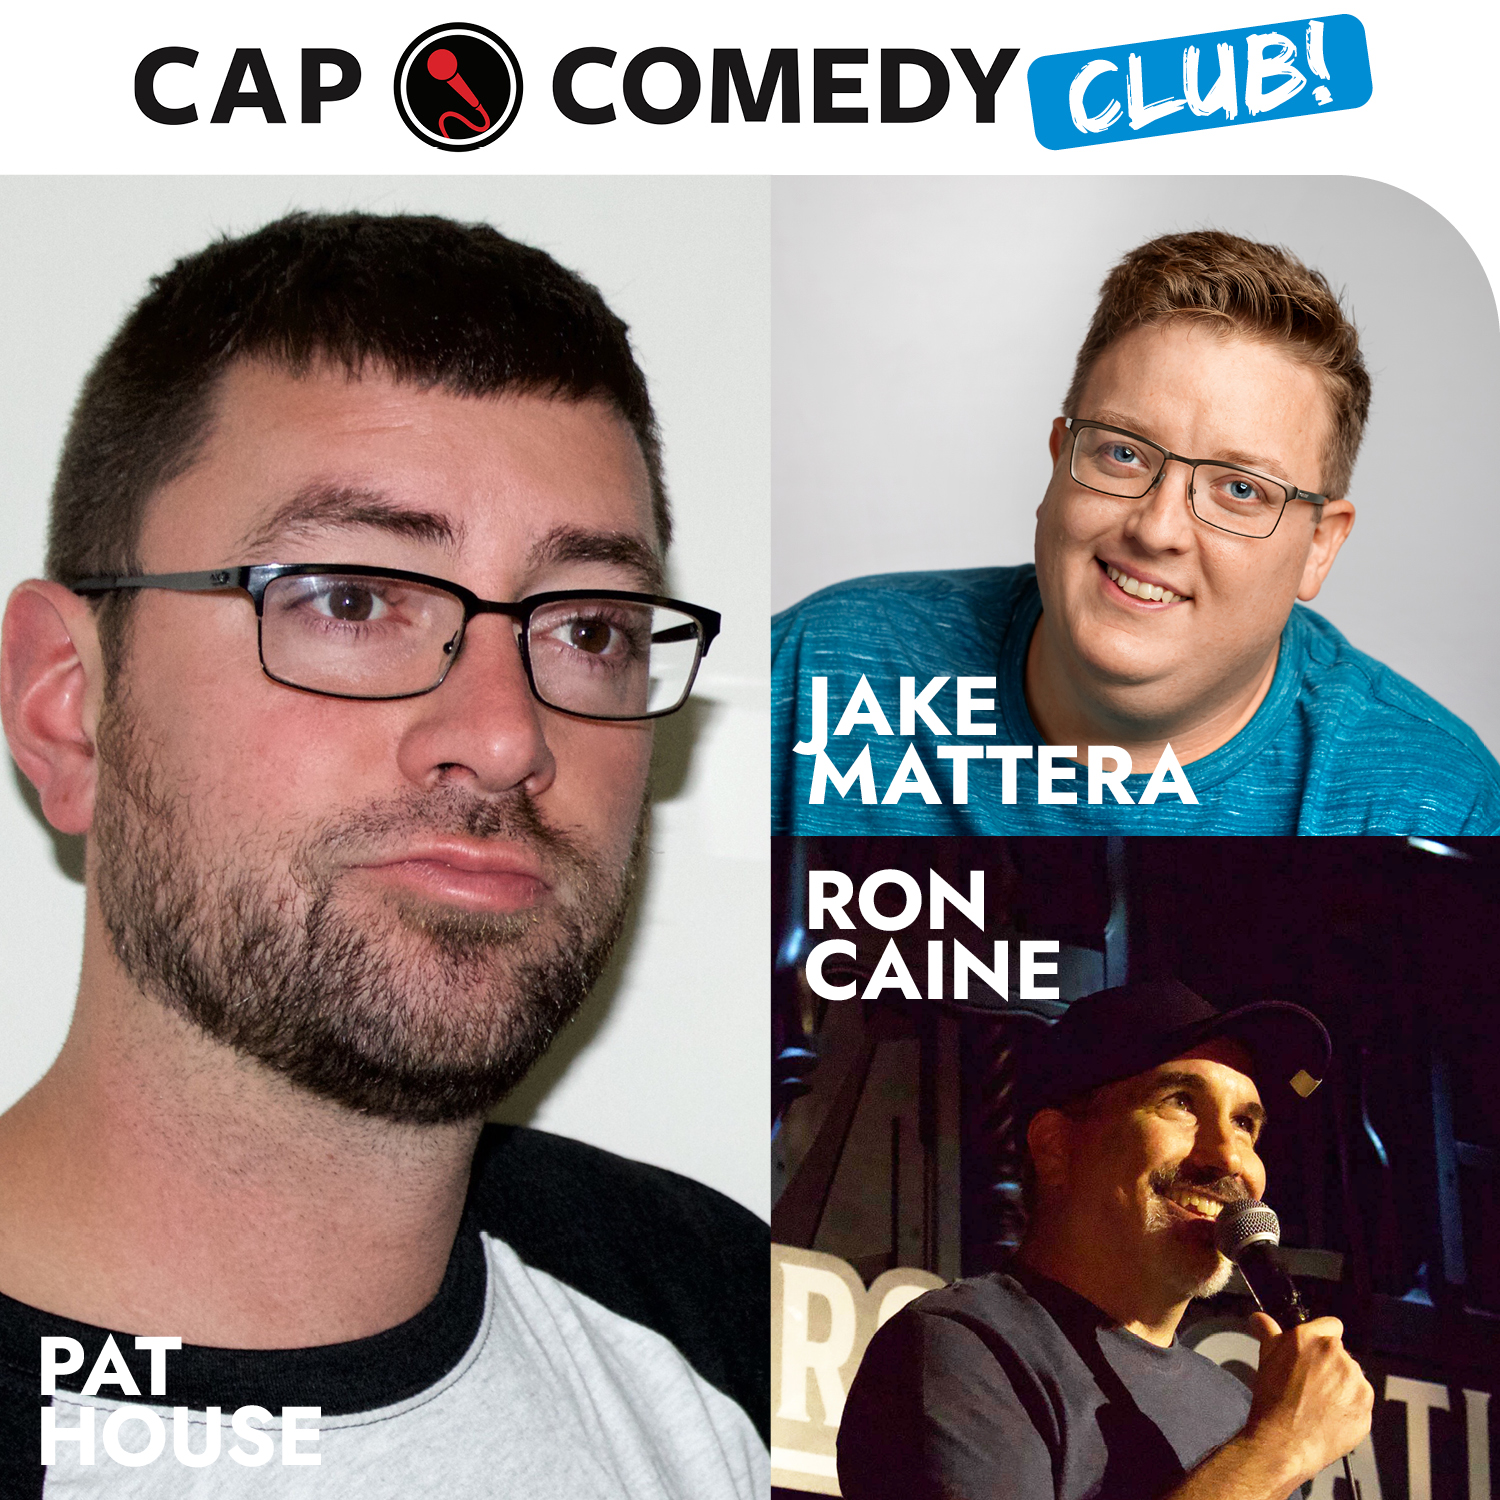 Image for CapComedy Club: Pat House and Jake Mattera with host Ron Caine